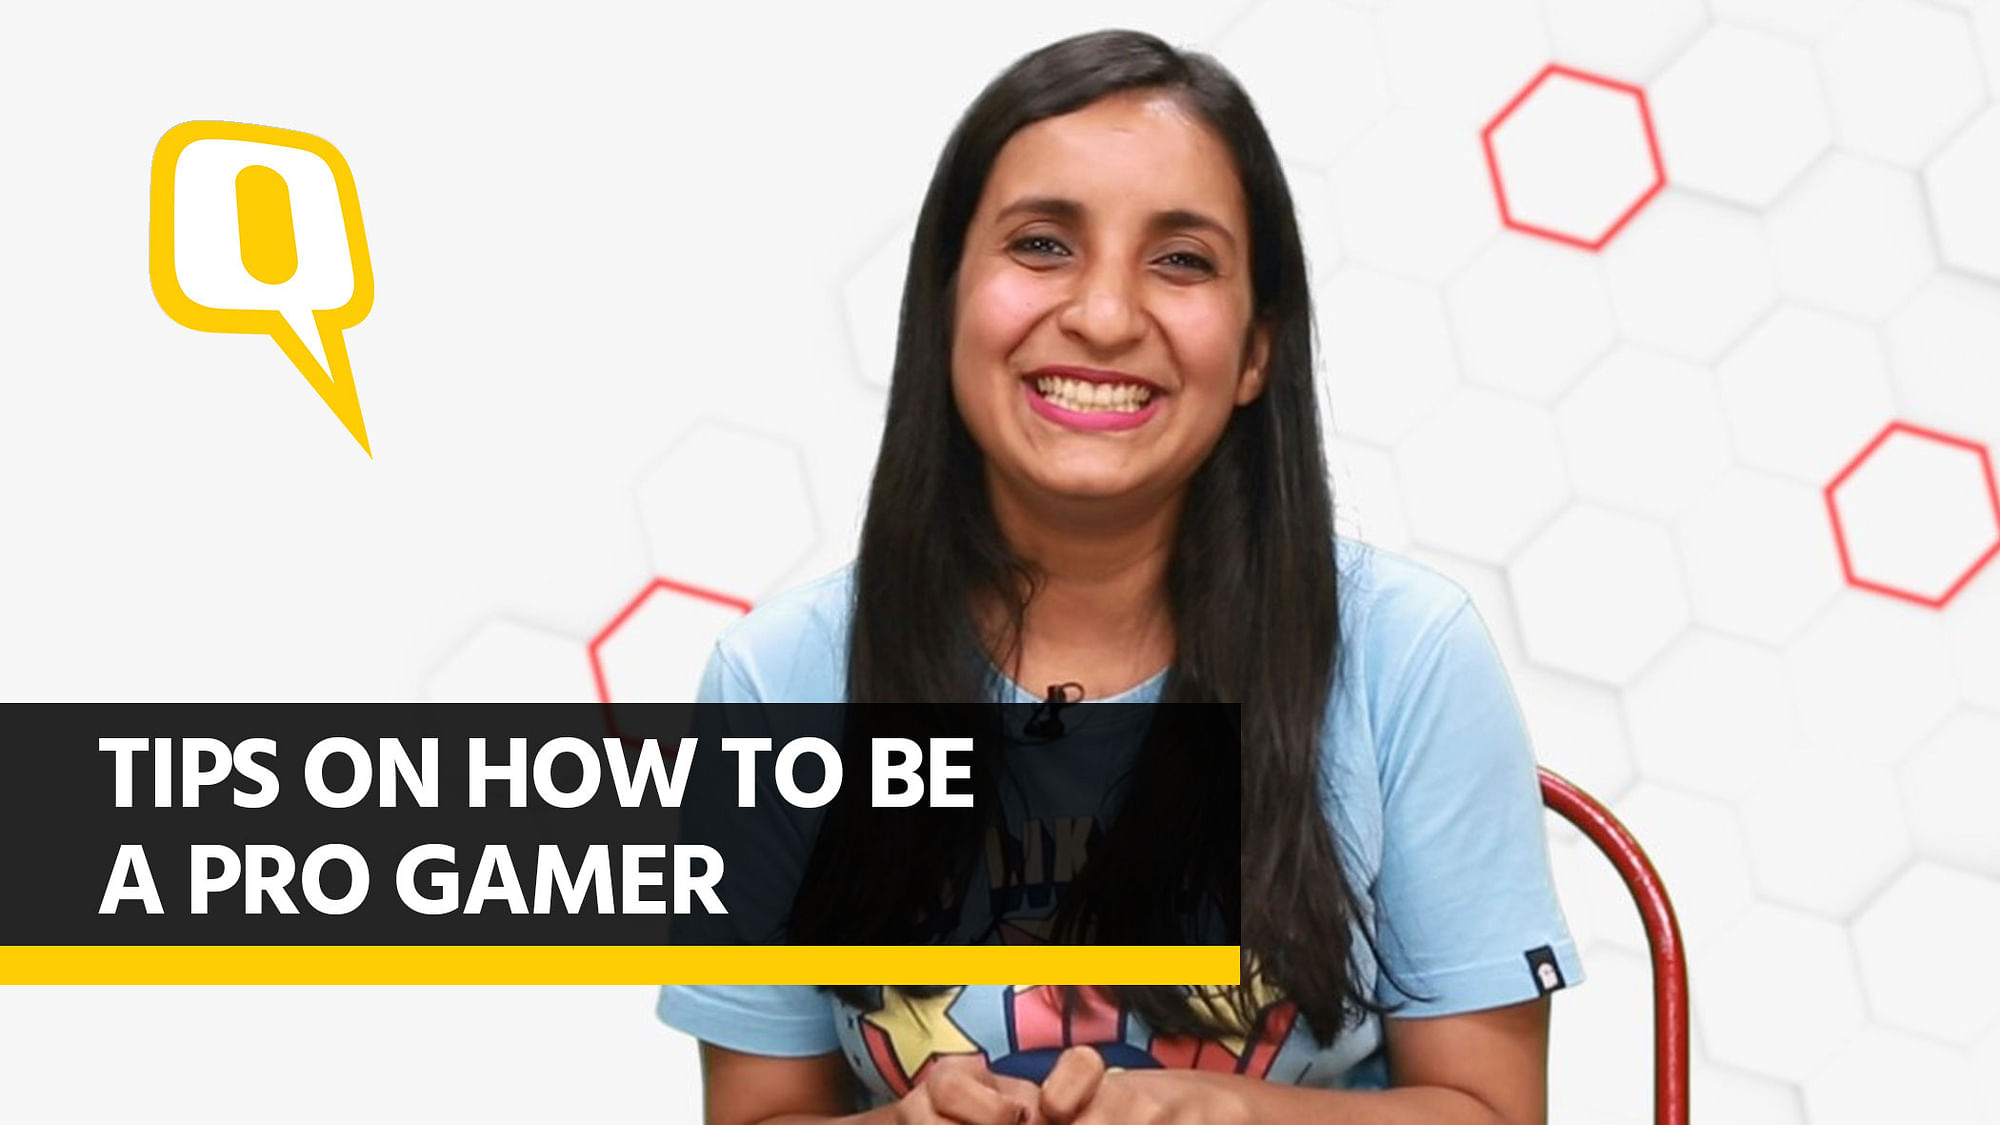 Indian gaming enthusiasts give gaming tips